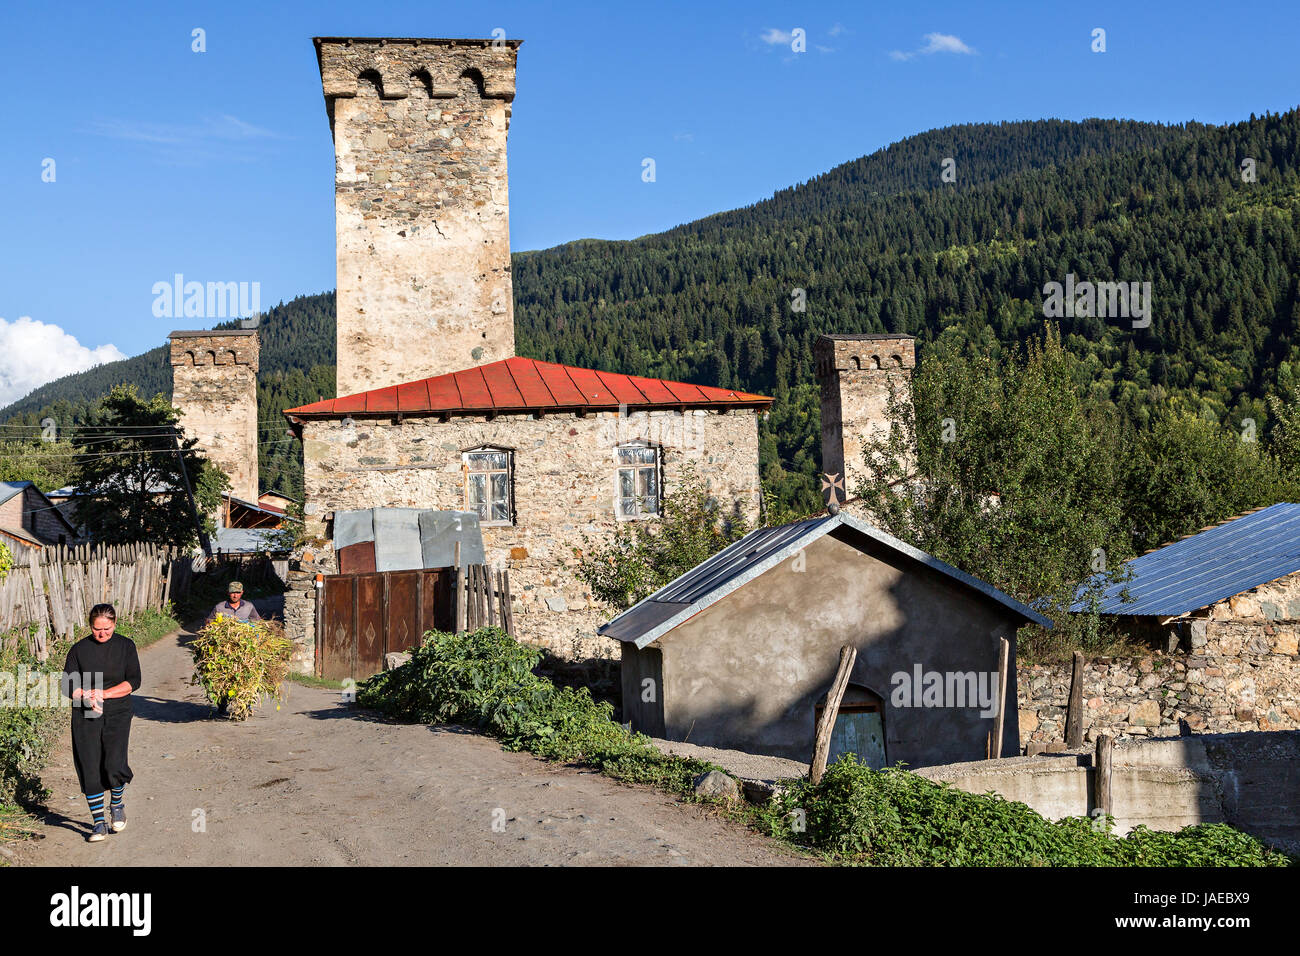 Village with medieval towers in the Caucasus Mountains, Georgia Stock Photo